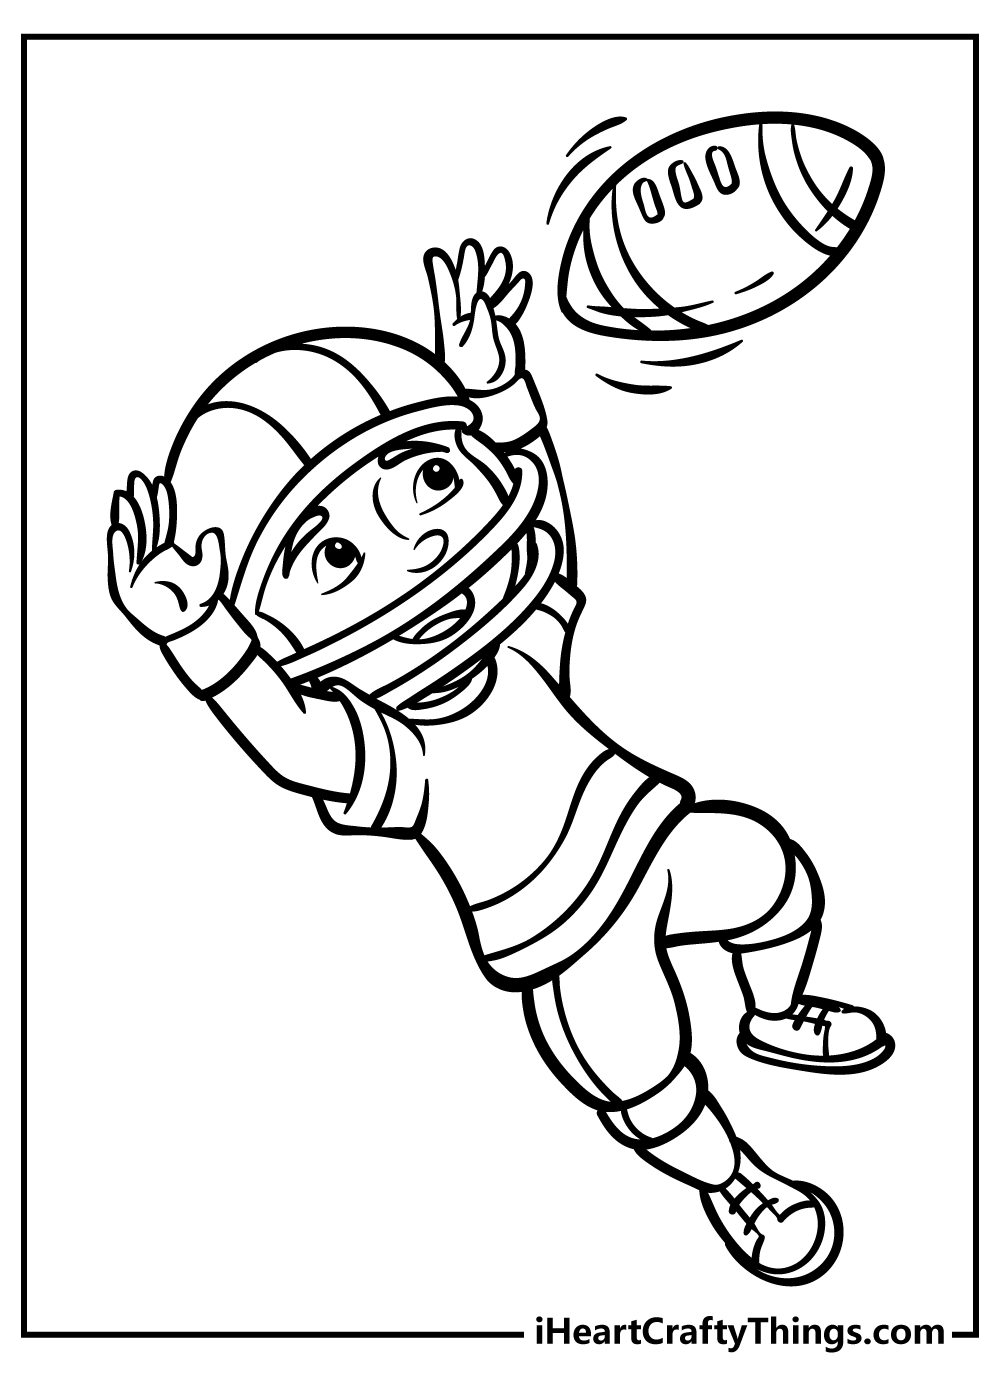 Football Coloring Book for kids free printable